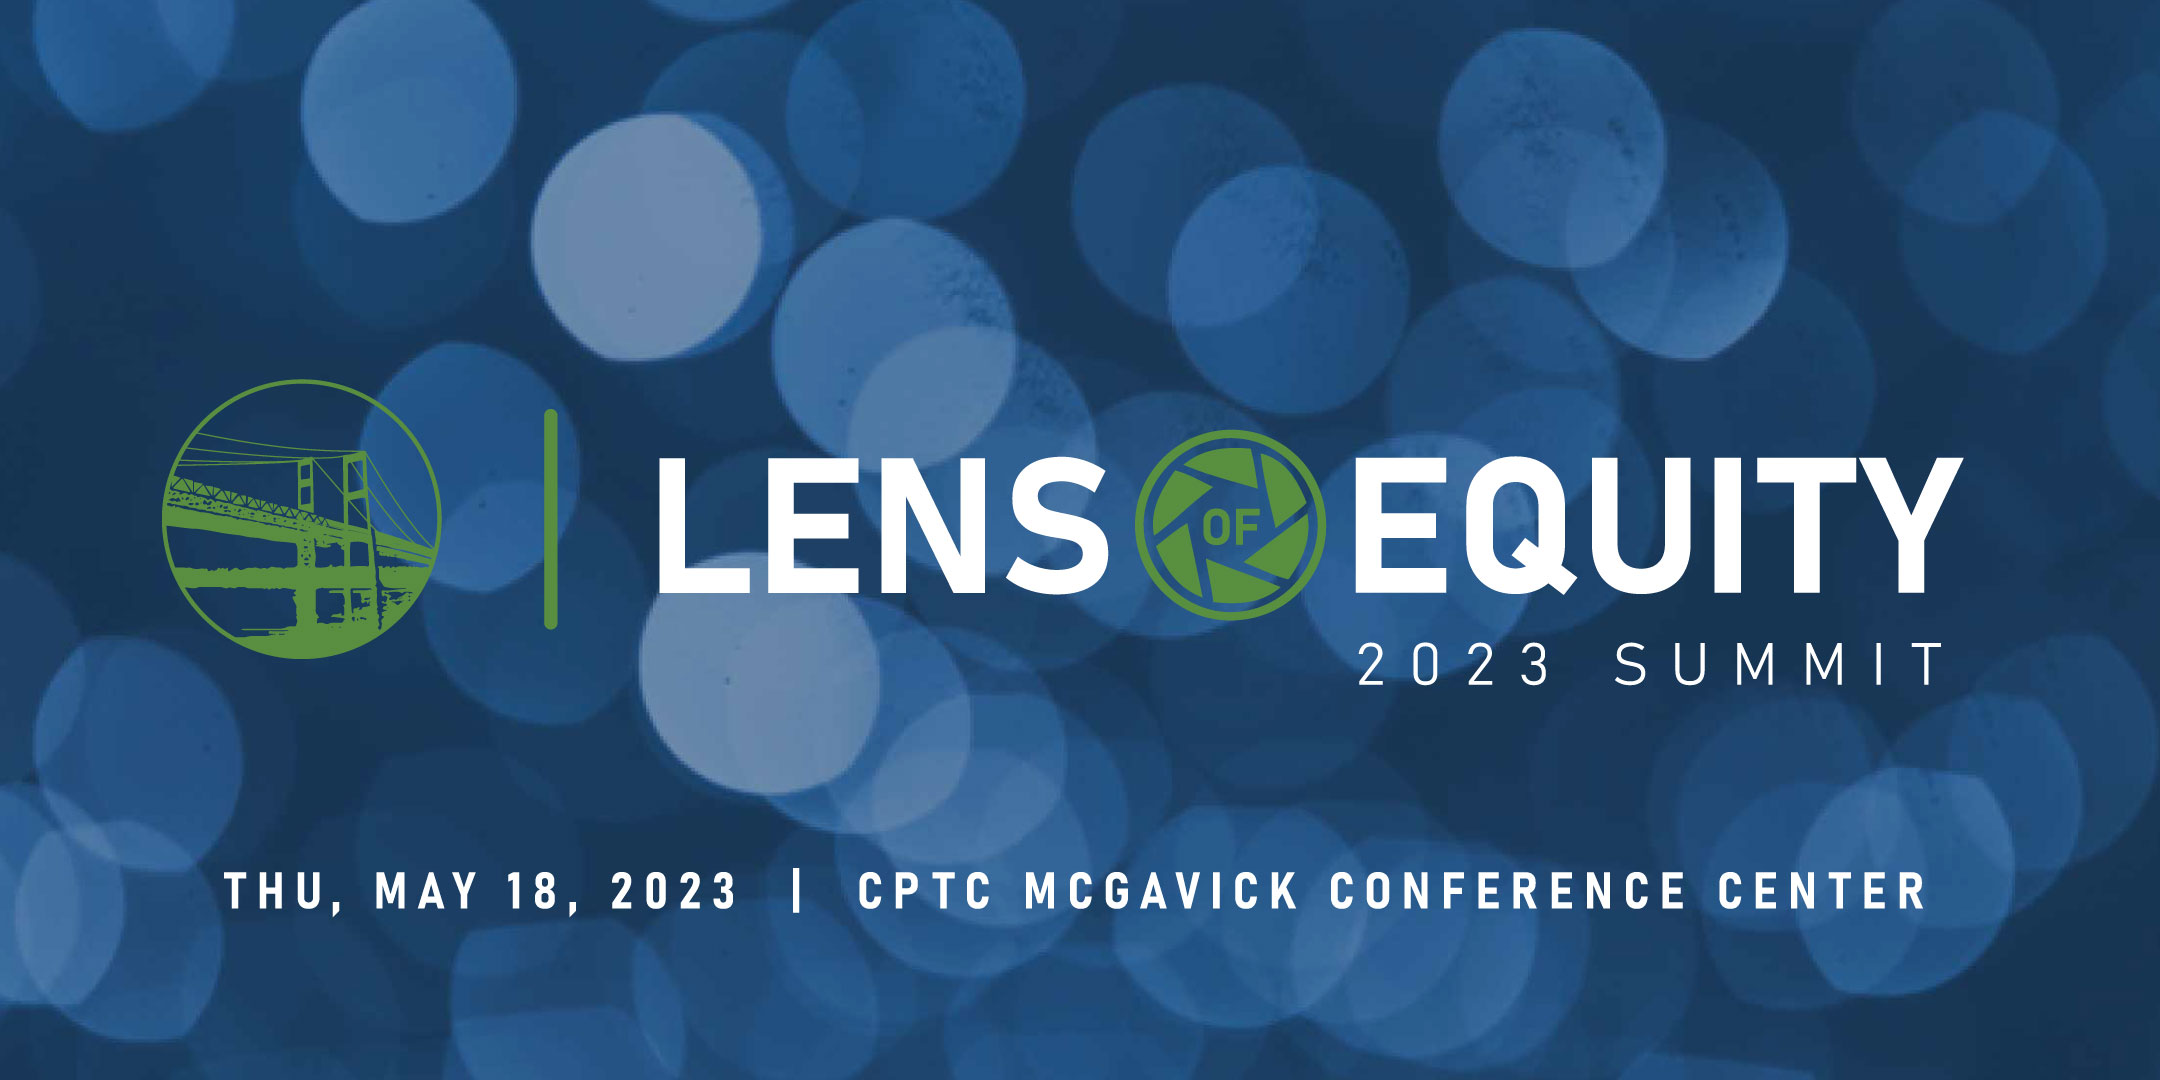 Lens of Equity Summit